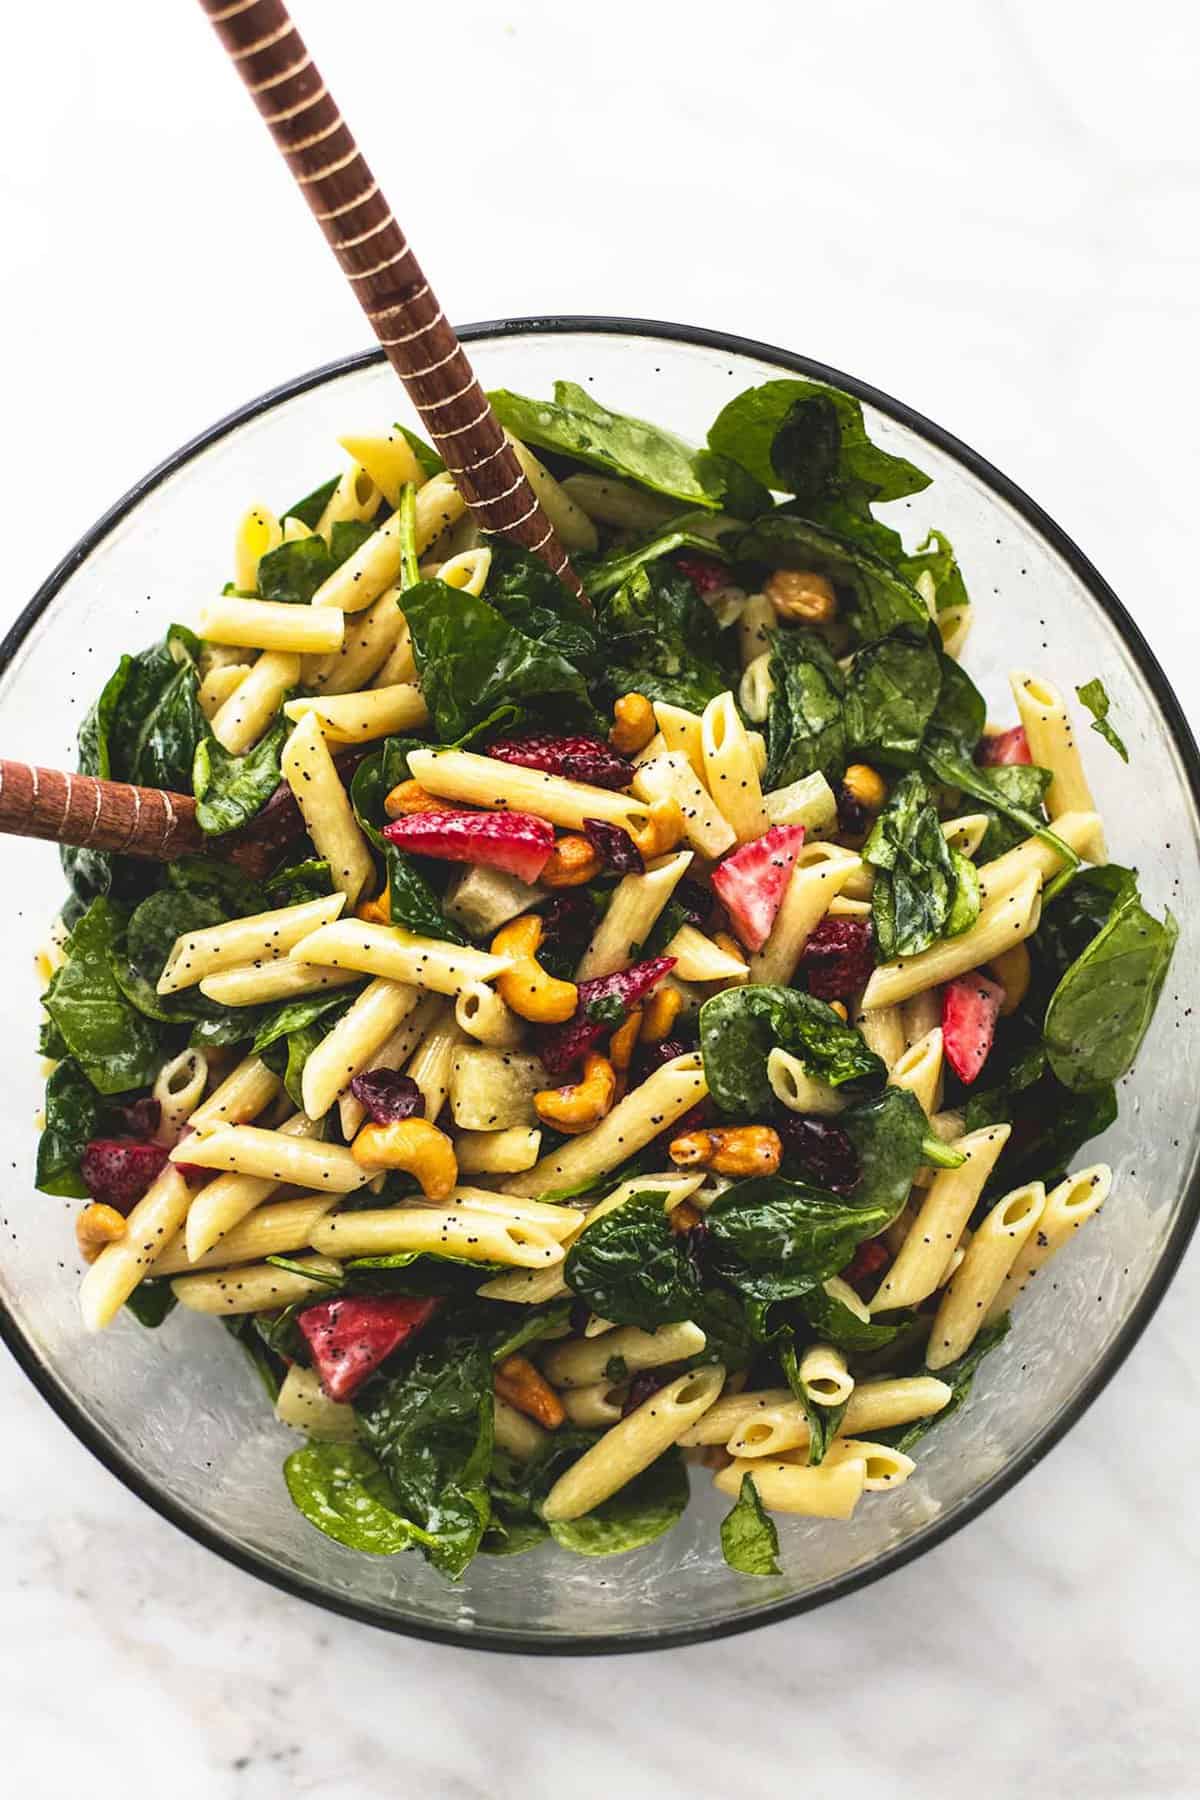 Strawberry Spinach Pasta Salad with Orange Poppy Seed Dressing | Creme